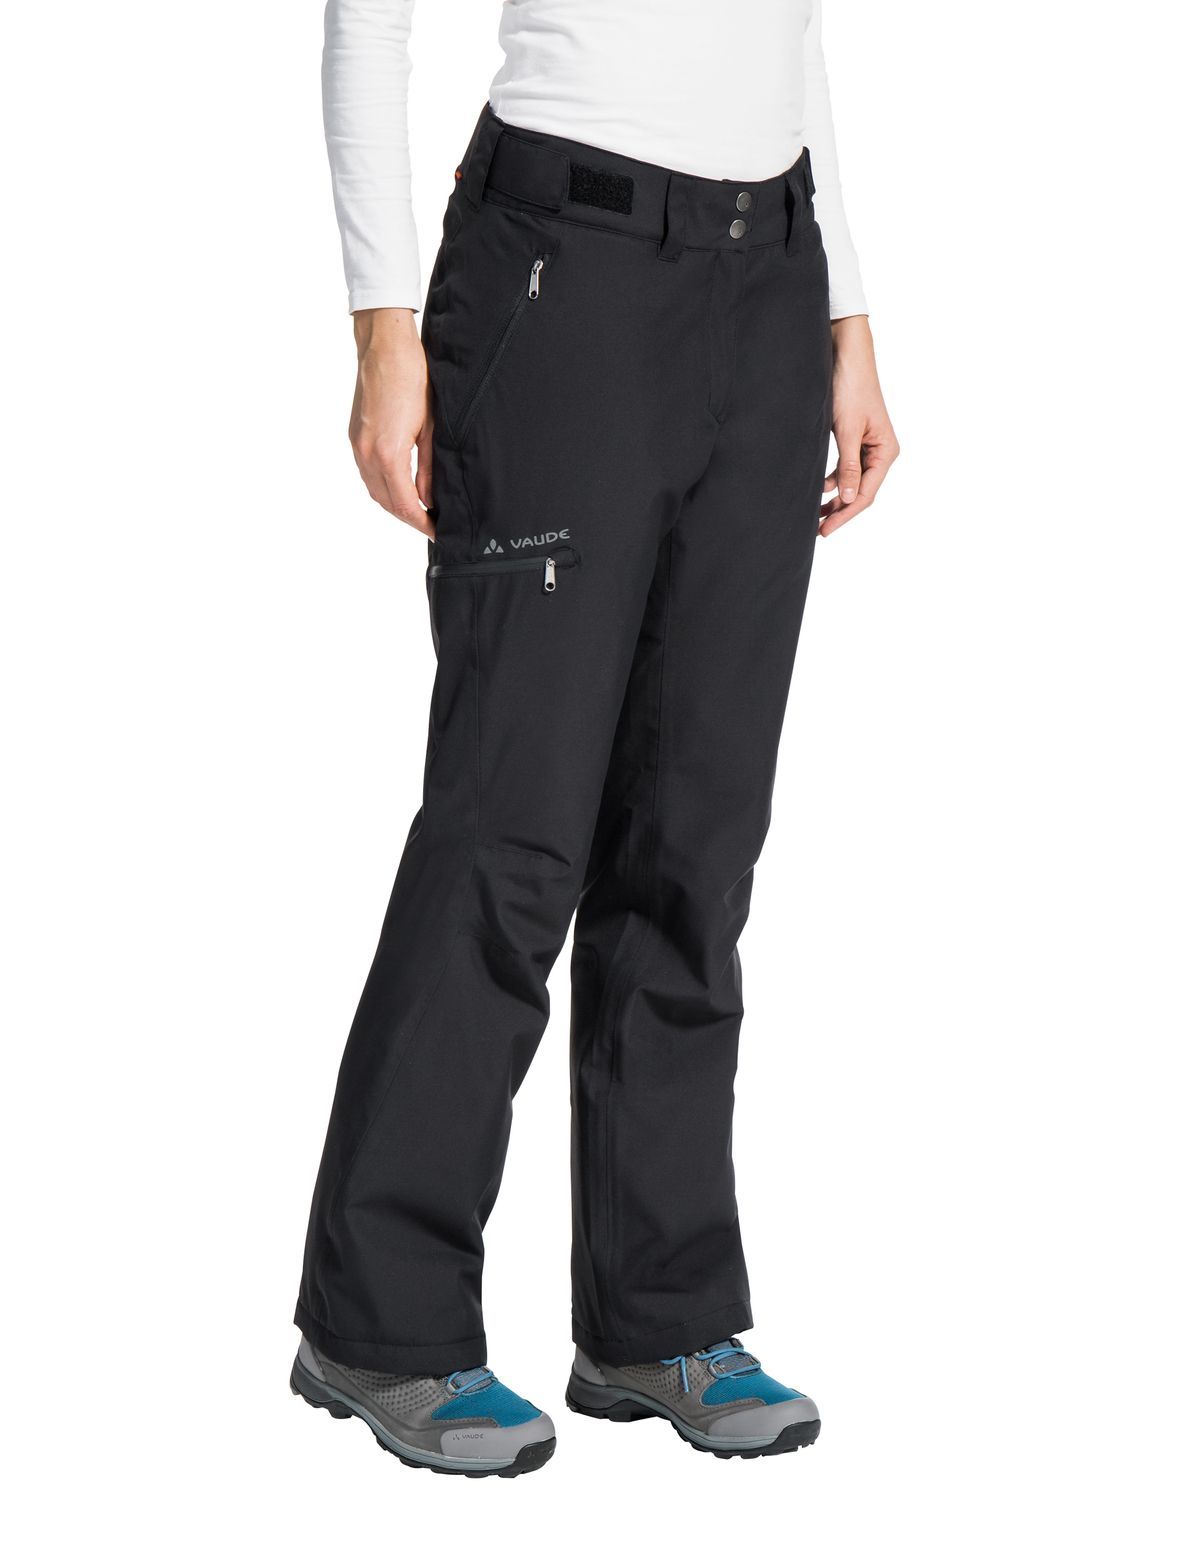 Vaude - W's Strathcona Padded Trousers - Recycled Polyester - Weekendbee - sustainable sportswear